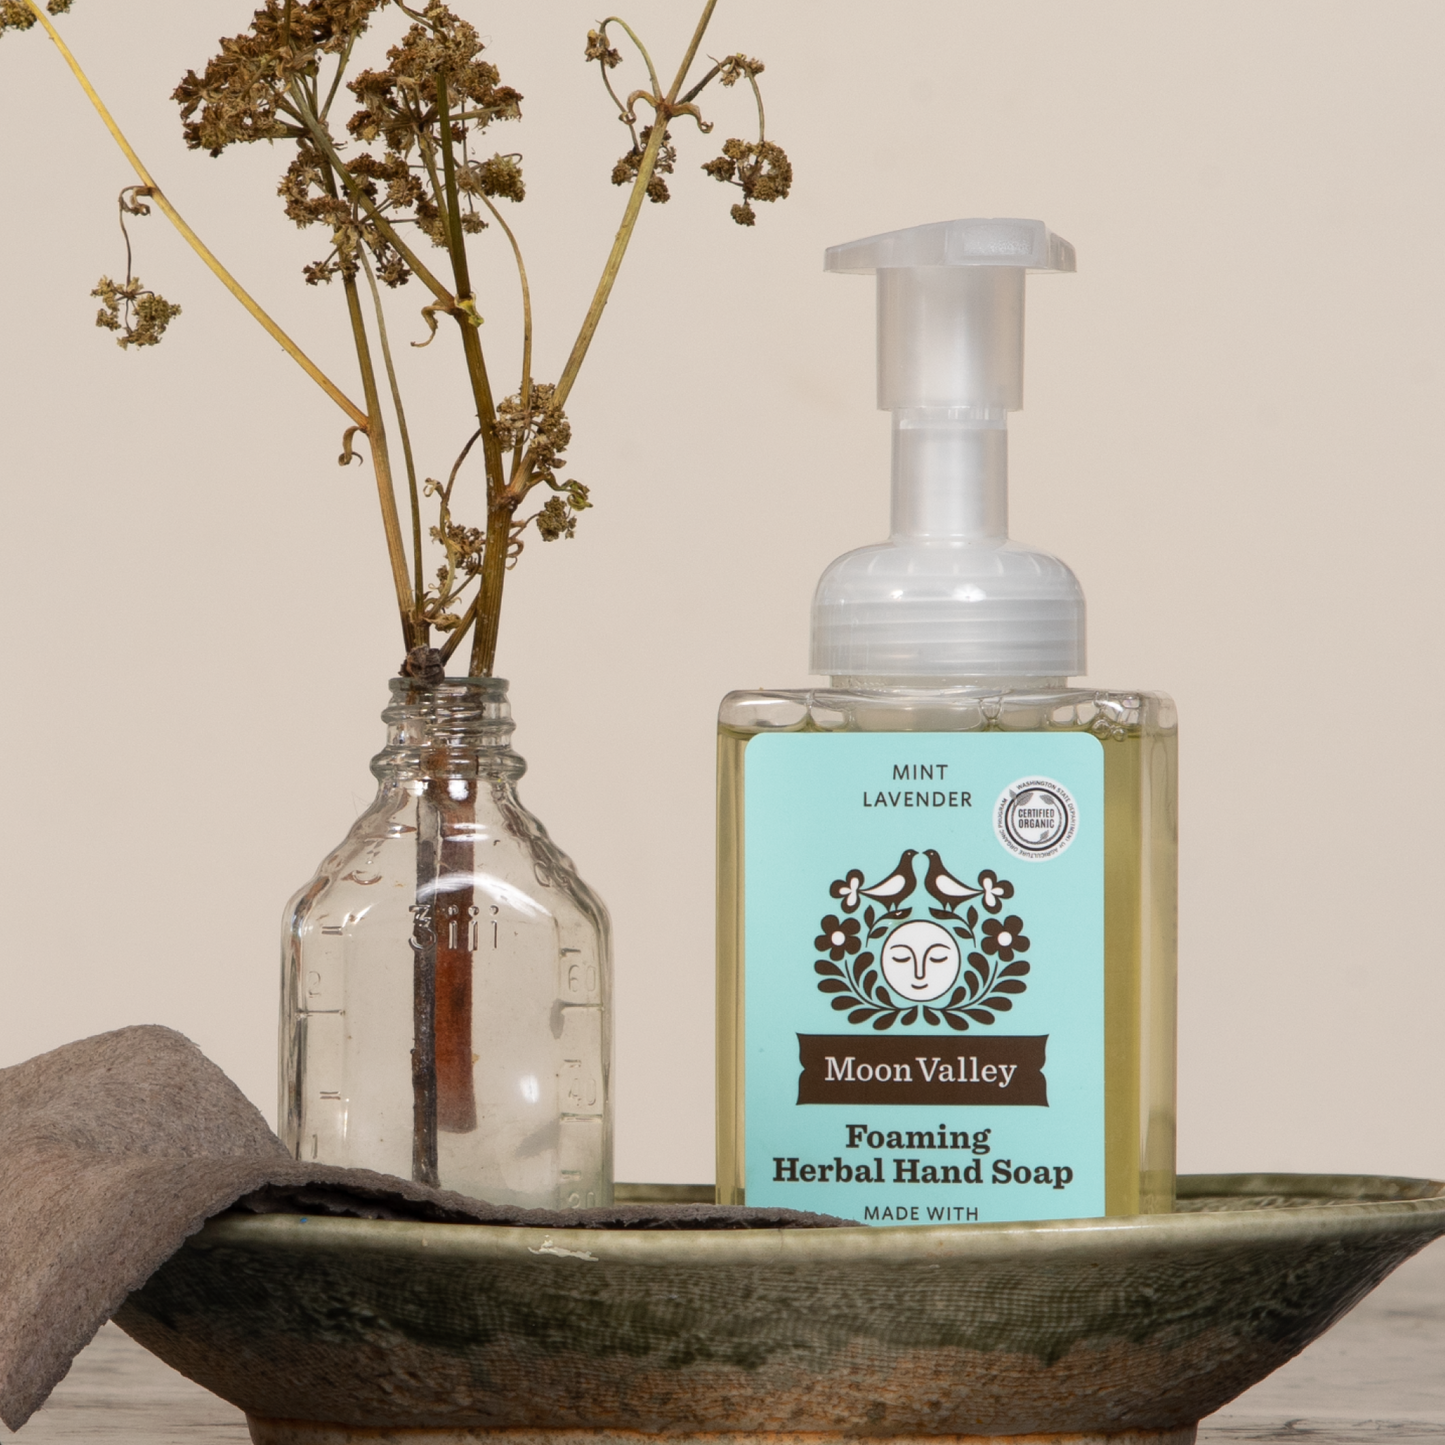 Moon Valley Organics Foaming Herbal Hand Soap Front Dispenser Bottle Mint Lavender with a bottle of dried flowers and a towel in a dish